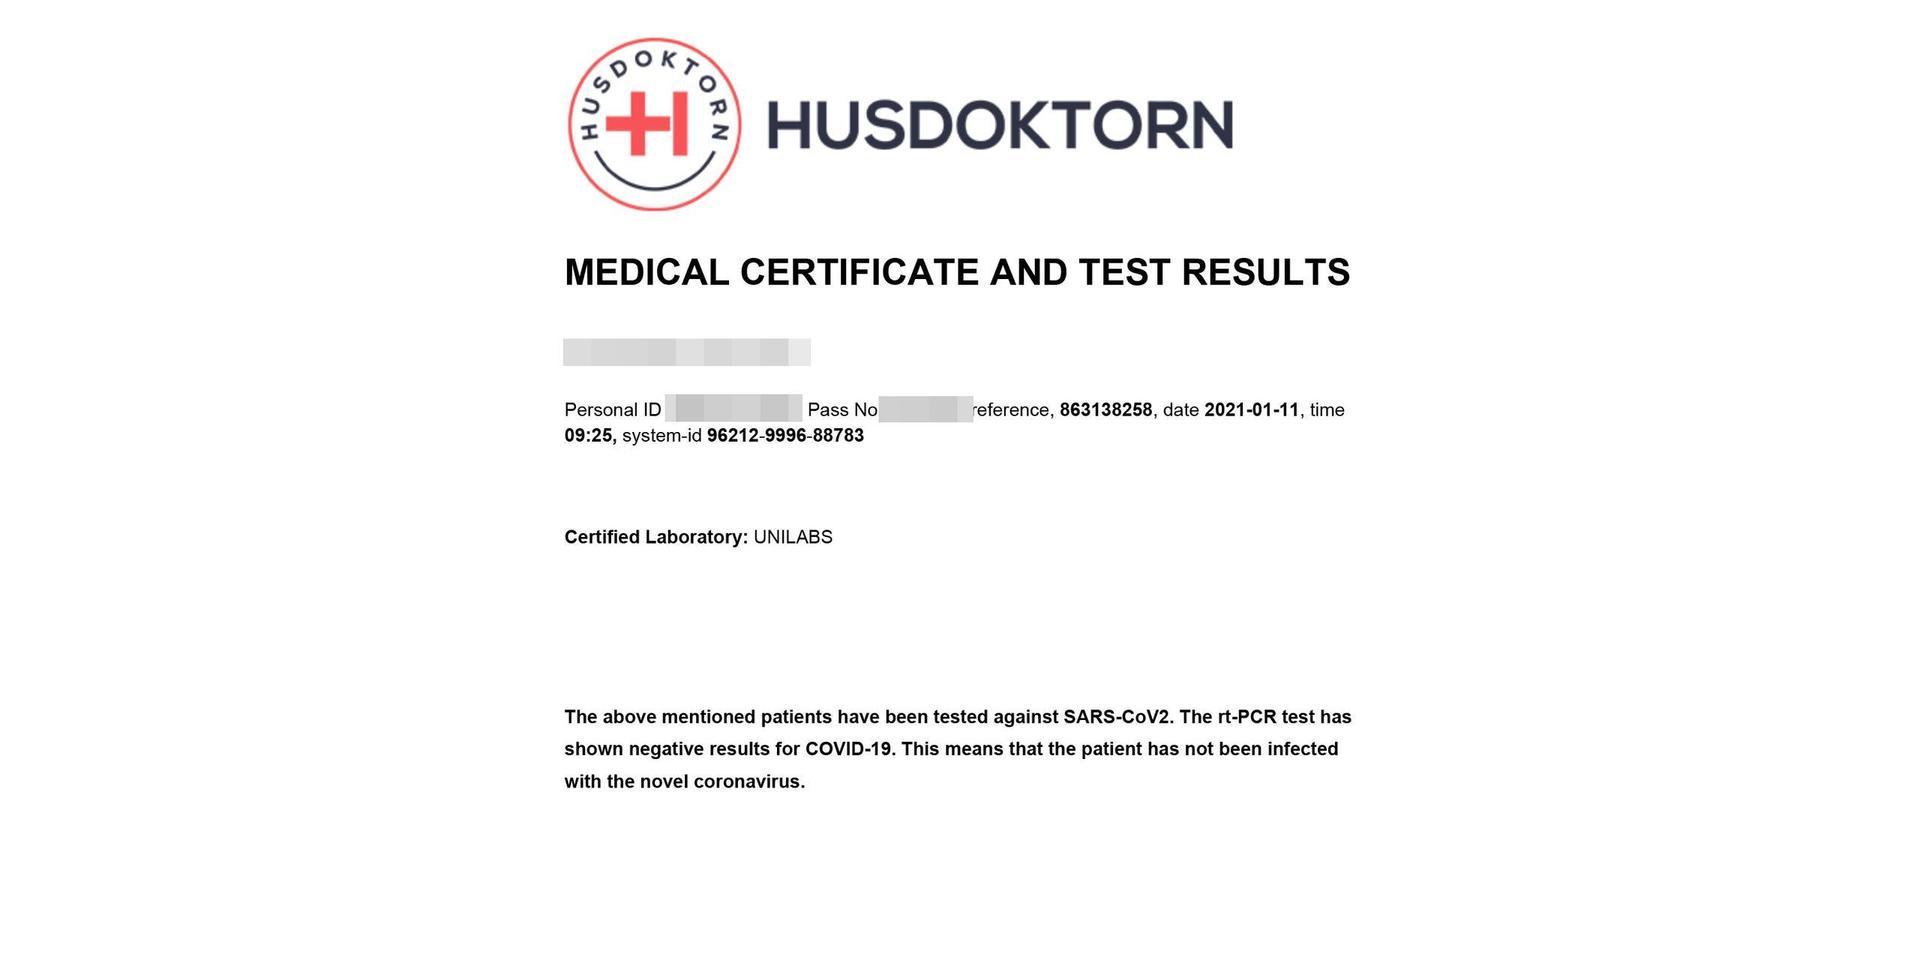 According to the certificate, this test was analysed at Unilabs. 